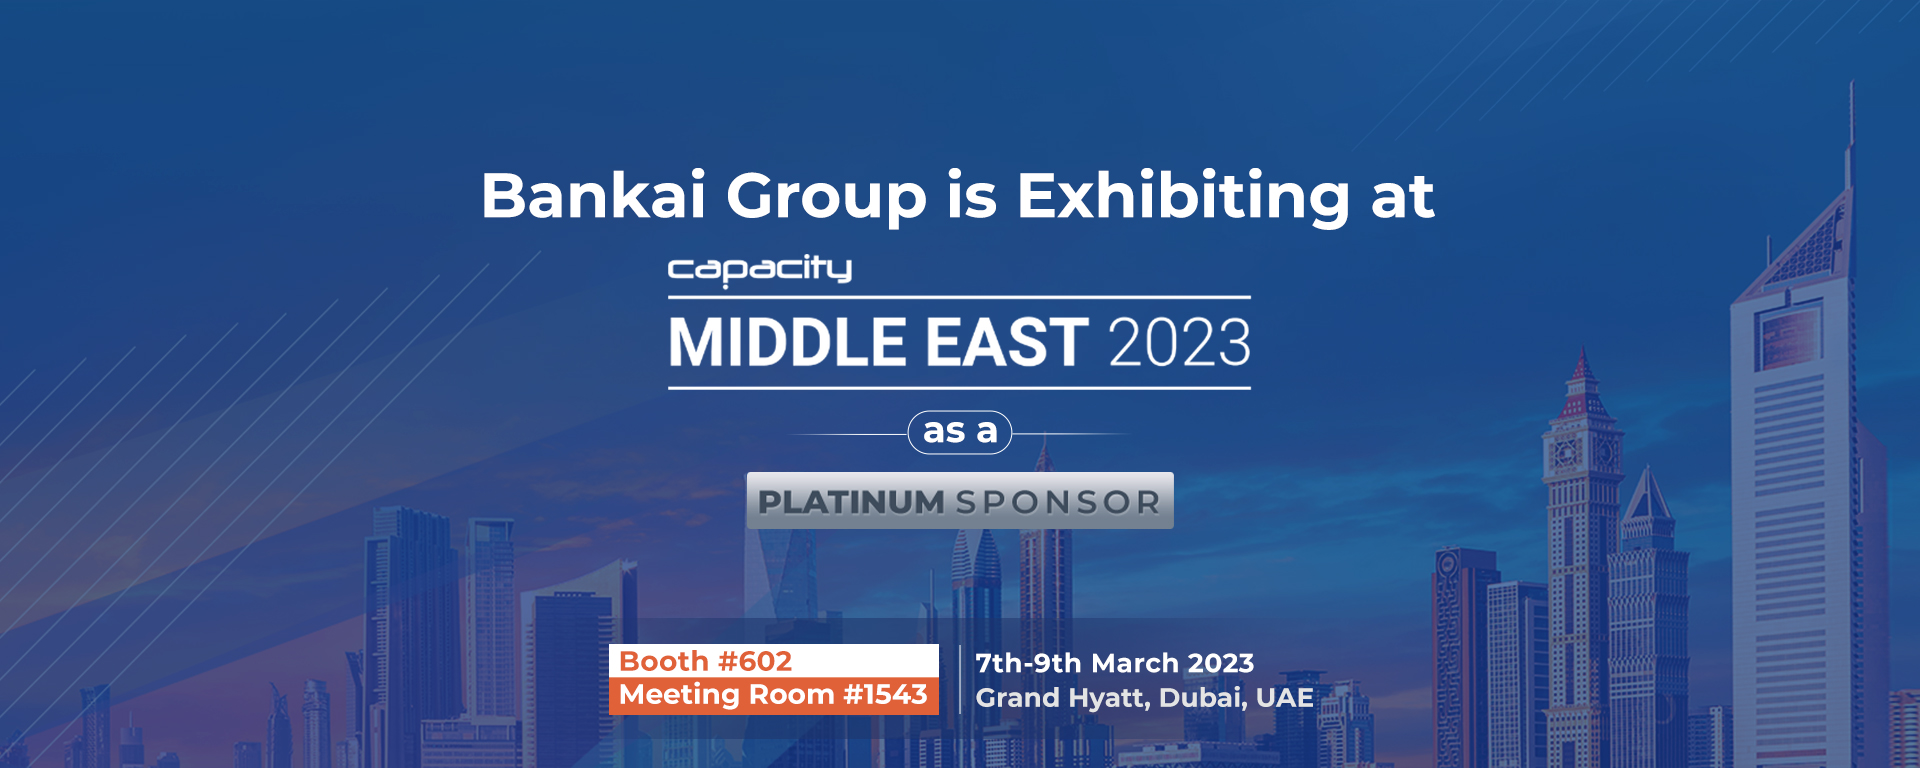 Team Bankai Will be at Capacity Middle East 2023